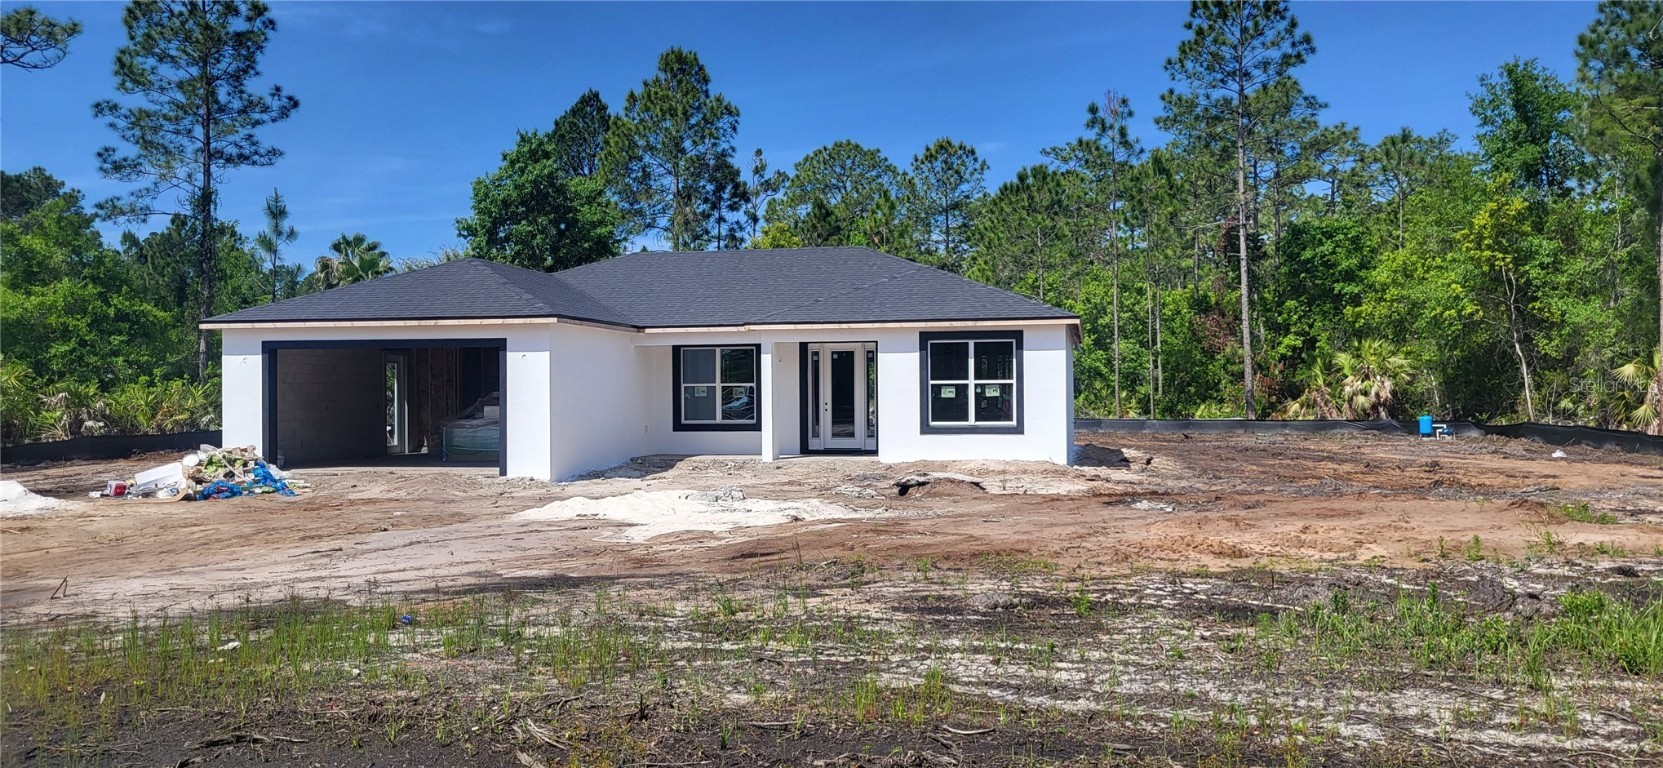 Details for 2604 Hickory Street, BUNNELL, FL 32110